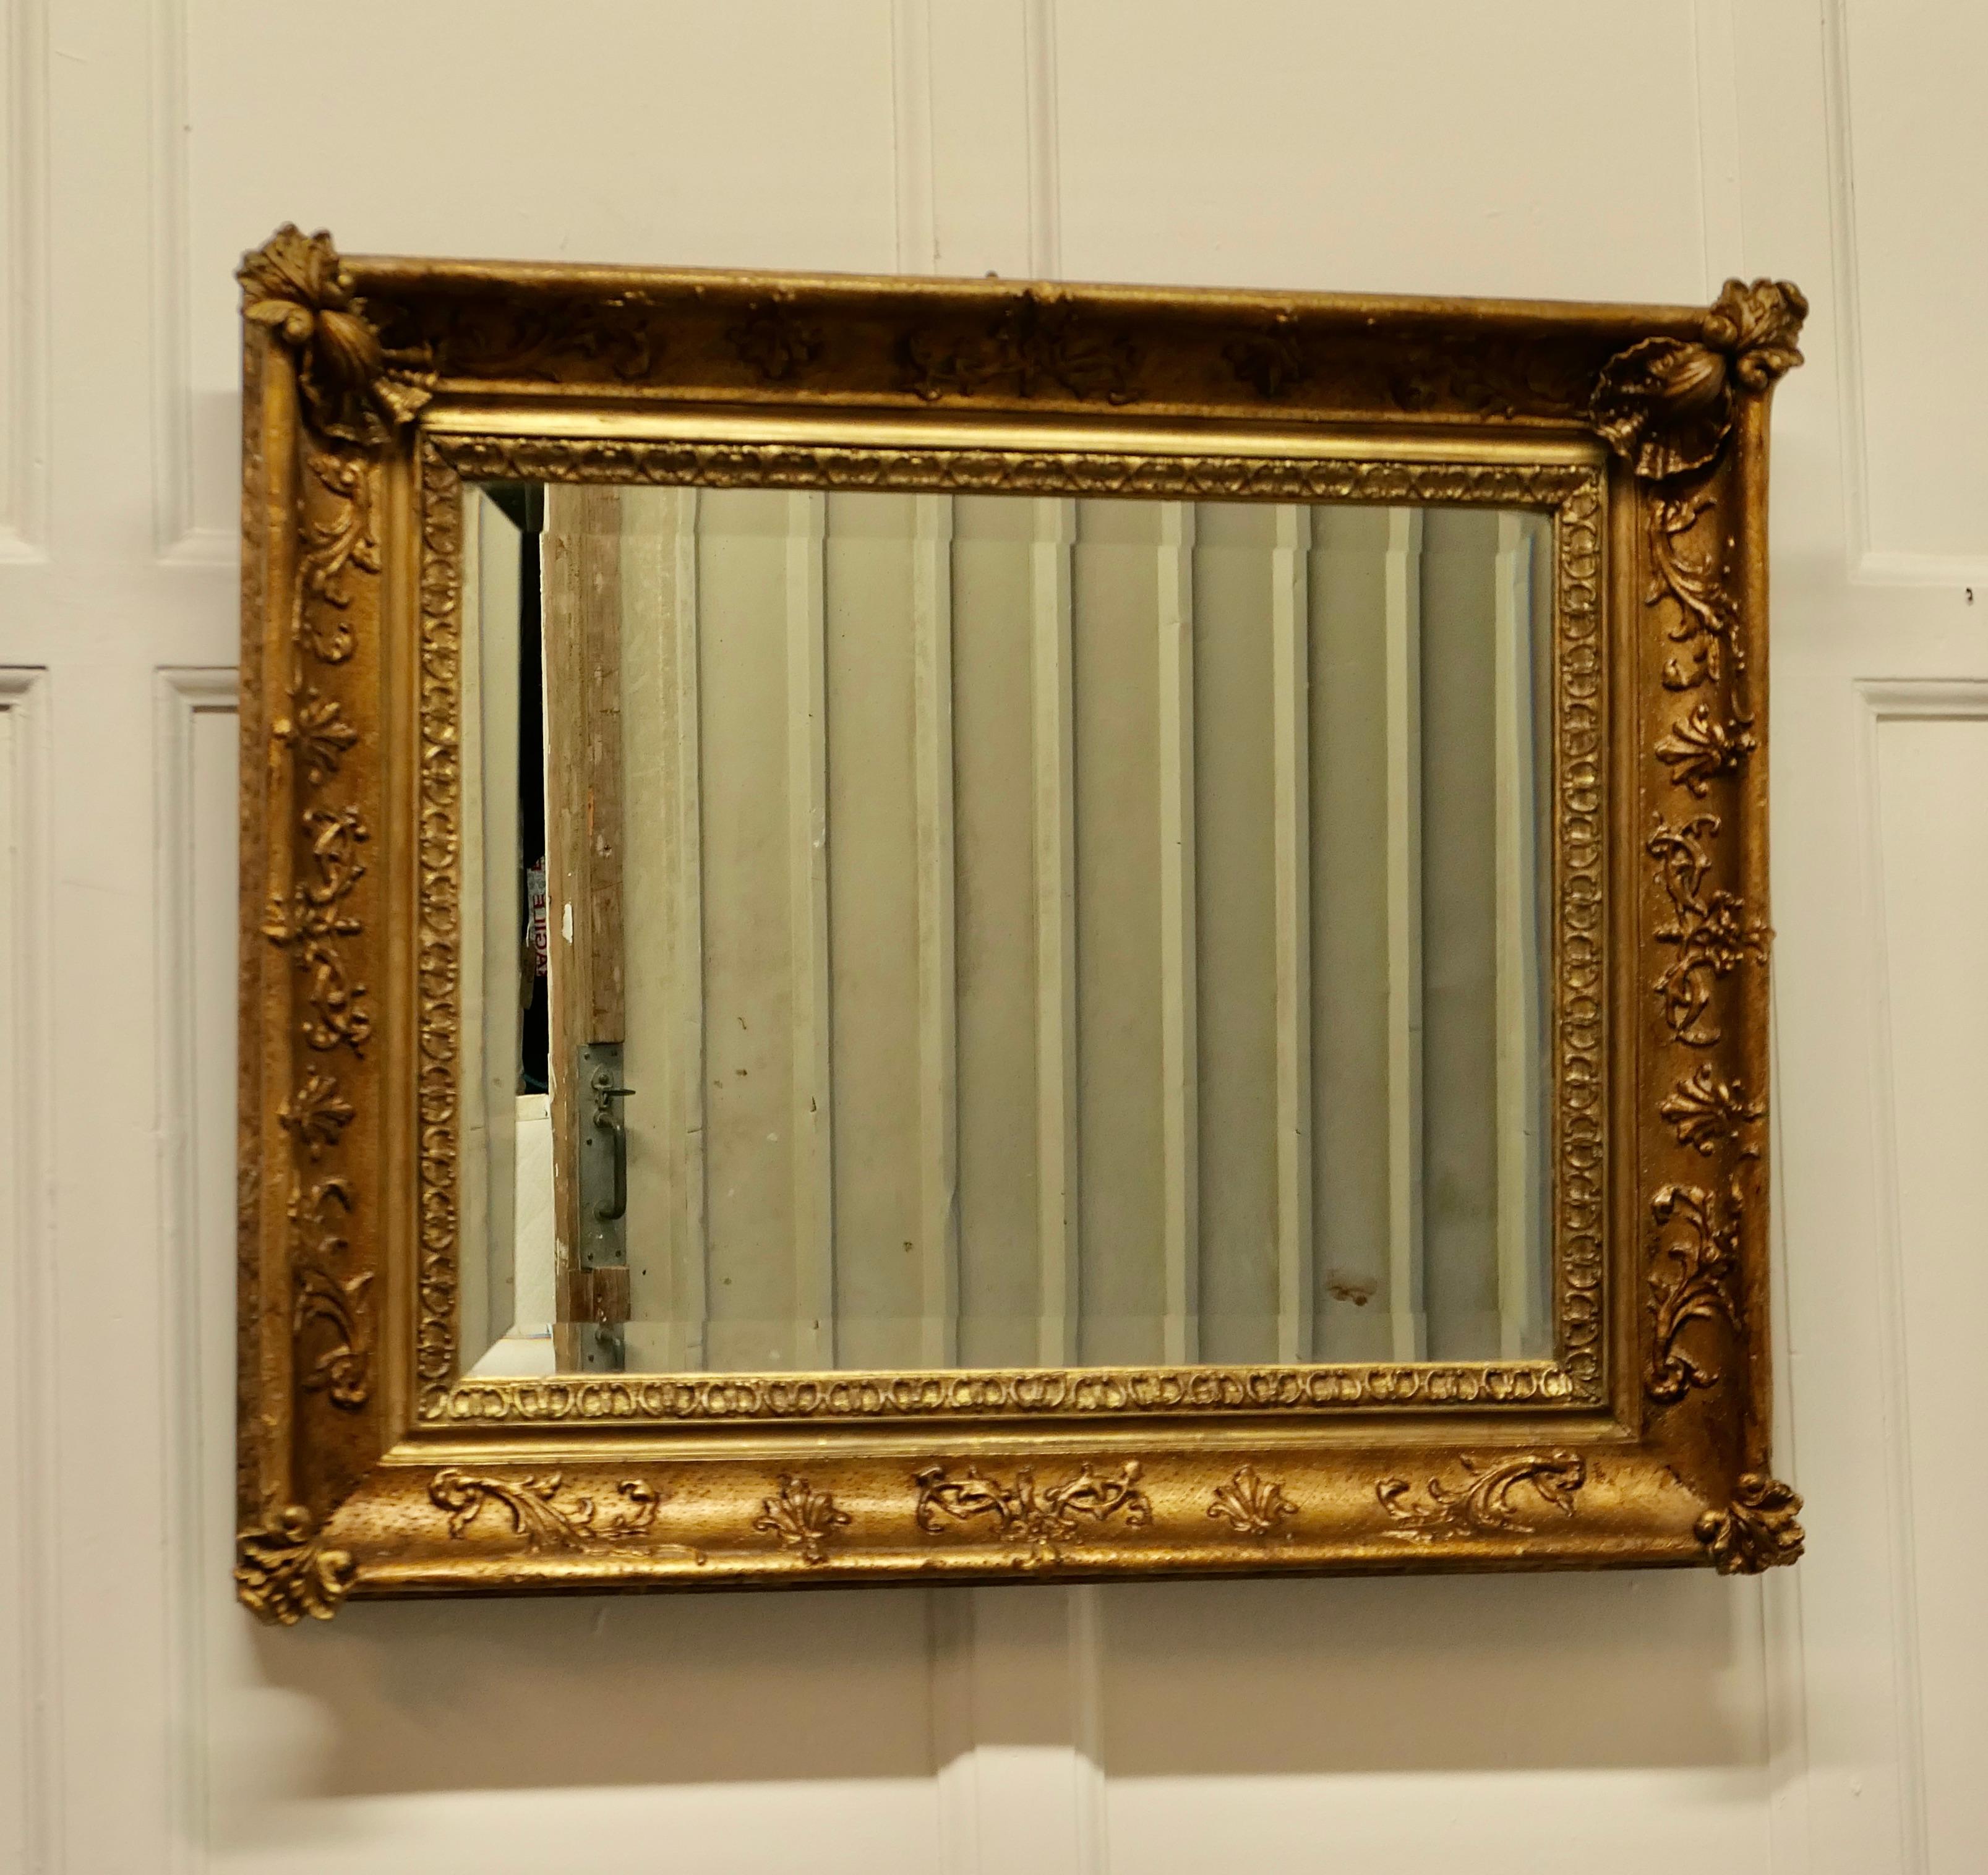 Lovely square gilt rococo wall mirror.

The mirror is in a Gilt Rococo Style Frame, it is almost square in shape with a 4” wide decorated frame
This is a beautiful and quite elaborate piece, the bevelled glass and frame are in good condition for